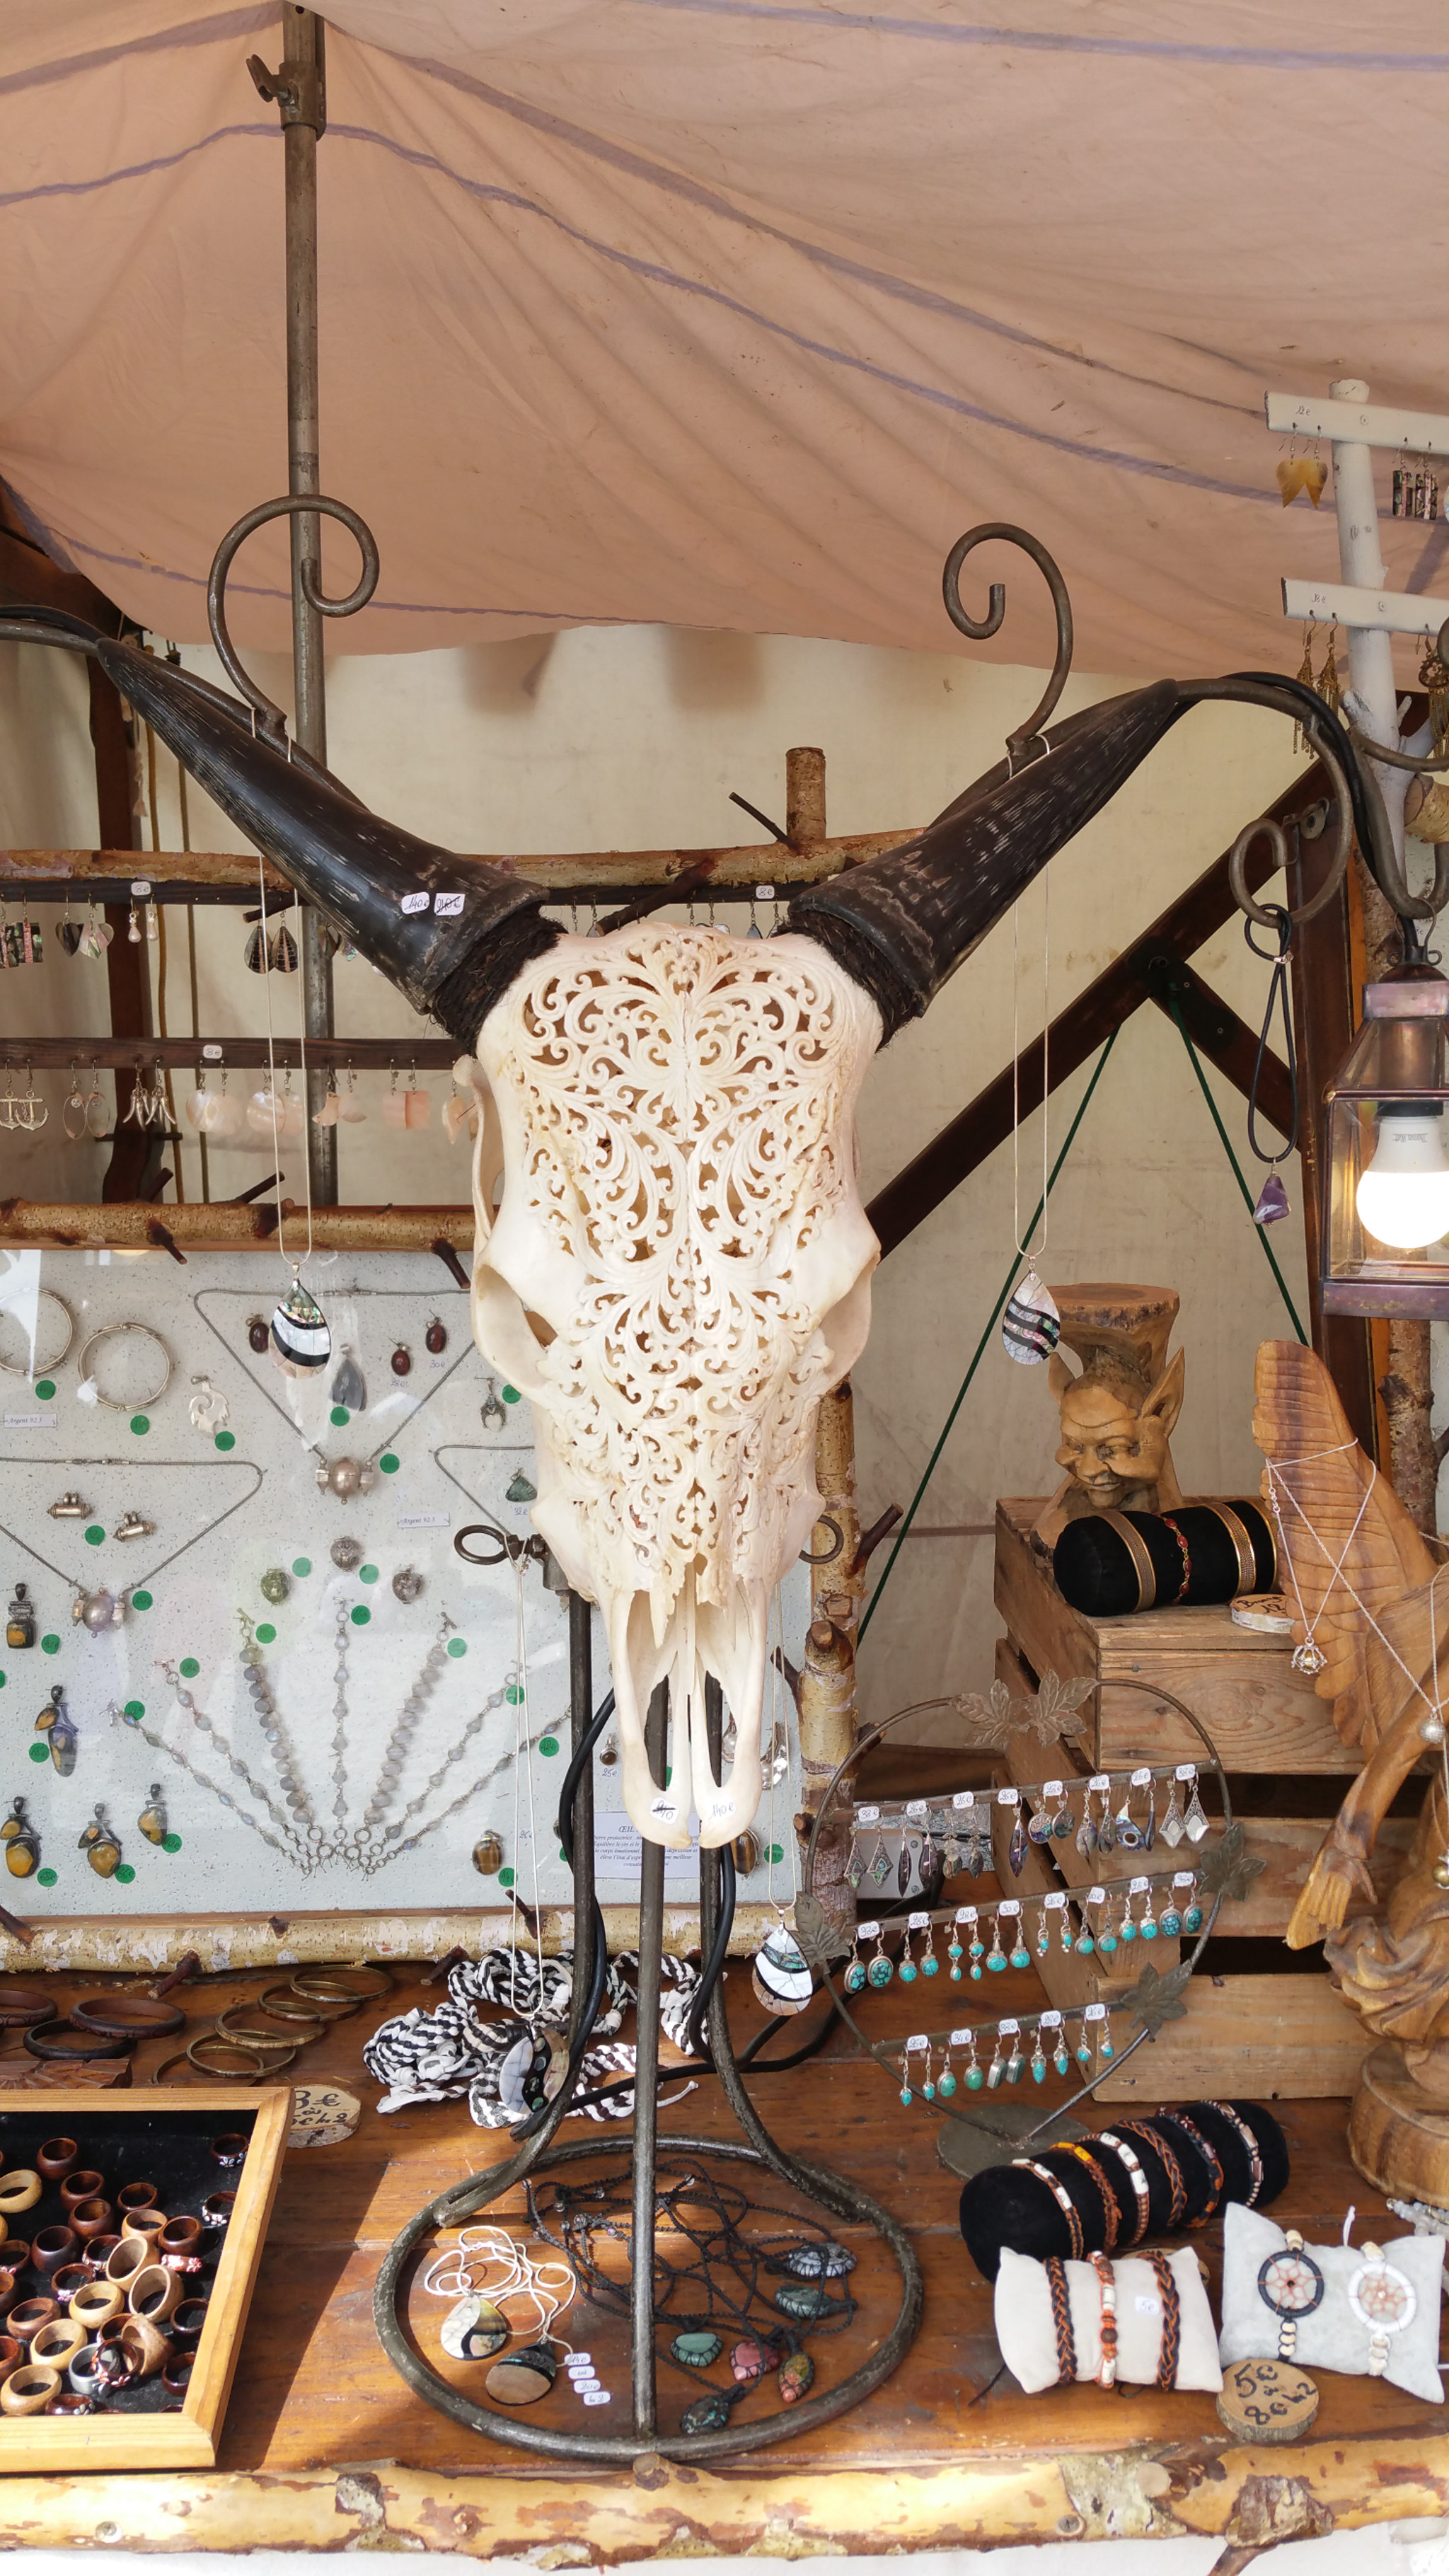 Samsung Galaxy S5 LTE-A sample photo. Cow skull with intricate designs photography